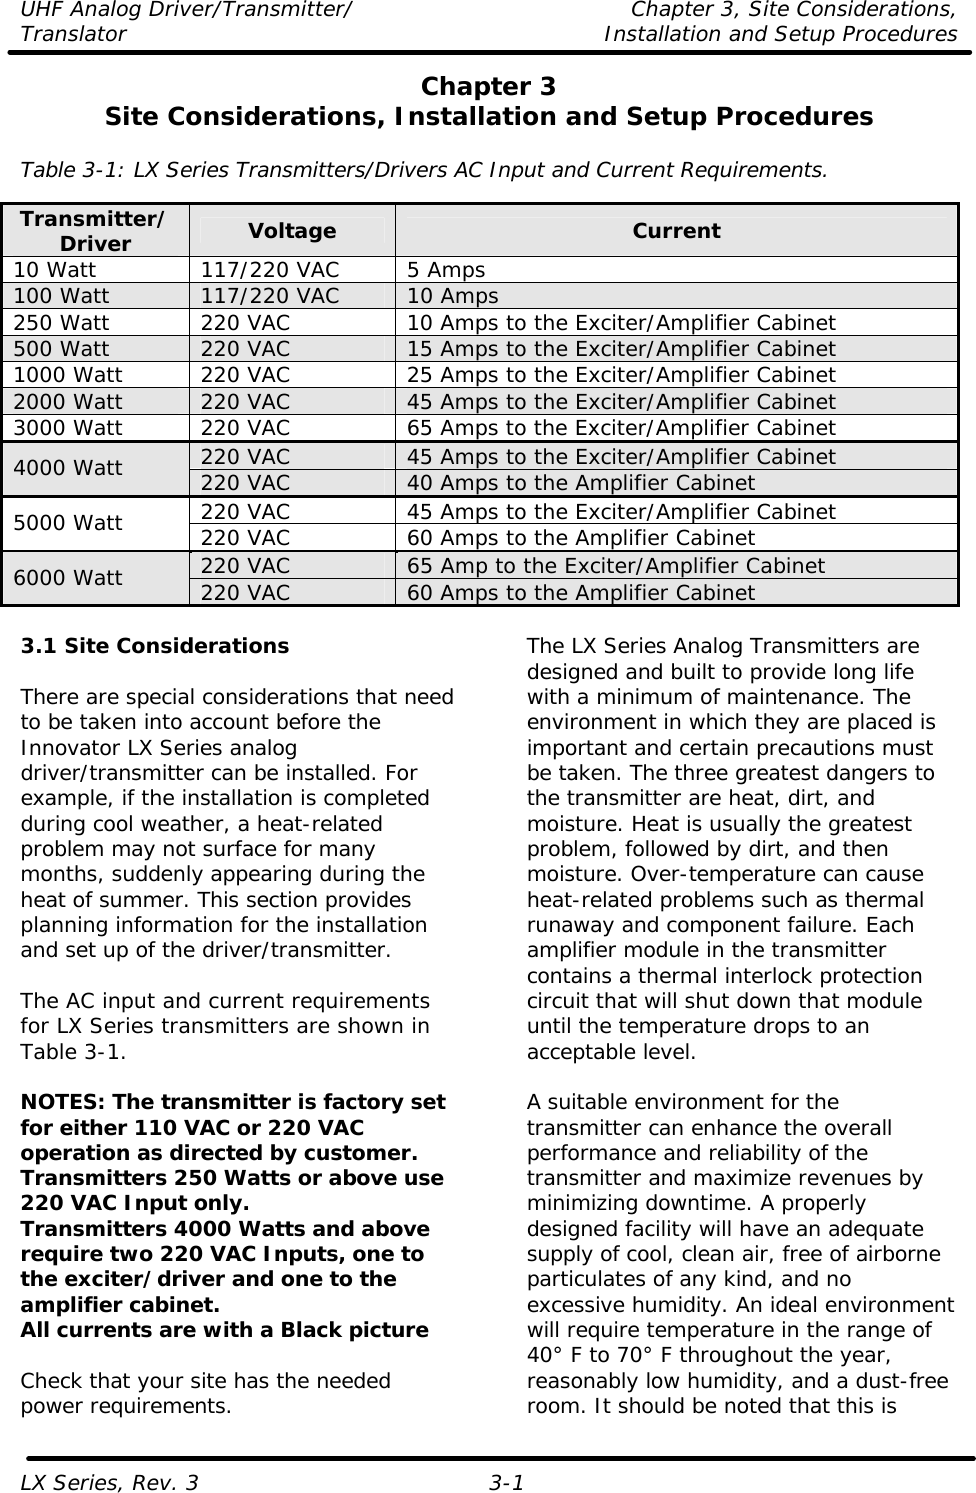 UHF Analog Driver/Transmitter/ Chapter 3, Site Considerations,  Translator Installation and Setup Procedures LX Series, Rev. 3 3-1 Chapter 3 Site Considerations, Installation and Setup Procedures  Table 3-1: LX Series Transmitters/Drivers AC Input and Current Requirements.  Transmitter/Driver Voltage Current 10 Watt 117/220 VAC 5 Amps 100 Watt 117/220 VAC 10 Amps 250 Watt 220 VAC 10 Amps to the Exciter/Amplifier Cabinet 500 Watt 220 VAC 15 Amps to the Exciter/Amplifier Cabinet 1000 Watt 220 VAC 25 Amps to the Exciter/Amplifier Cabinet 2000 Watt 220 VAC 45 Amps to the Exciter/Amplifier Cabinet 3000 Watt 220 VAC 65 Amps to the Exciter/Amplifier Cabinet 220 VAC 45 Amps to the Exciter/Amplifier Cabinet 4000 Watt 220 VAC 40 Amps to the Amplifier Cabinet 220 VAC 45 Amps to the Exciter/Amplifier Cabinet 5000 Watt 220 VAC 60 Amps to the Amplifier Cabinet 220 VAC 65 Amp to the Exciter/Amplifier Cabinet 6000 Watt 220 VAC 60 Amps to the Amplifier Cabinet  3.1 Site Considerations  There are special considerations that need to be taken into account before the Innovator LX Series analog driver/transmitter can be installed. For example, if the installation is completed during cool weather, a heat-related problem may not surface for many months, suddenly appearing during the heat of summer. This section provides planning information for the installation and set up of the driver/transmitter.  The AC input and current requirements for LX Series transmitters are shown in Table 3-1.  NOTES: The transmitter is factory set for either 110 VAC or 220 VAC operation as directed by customer.  Transmitters 250 Watts or above use 220 VAC Input only. Transmitters 4000 Watts and above require two 220 VAC Inputs, one to the exciter/driver and one to the amplifier cabinet. All currents are with a Black picture  Check that your site has the needed power requirements. The LX Series Analog Transmitters are designed and built to provide long life with a minimum of maintenance. The environment in which they are placed is important and certain precautions must be taken. The three greatest dangers to the transmitter are heat, dirt, and moisture. Heat is usually the greatest problem, followed by dirt, and then moisture. Over-temperature can cause heat-related problems such as thermal runaway and component failure. Each amplifier module in the transmitter contains a thermal interlock protection circuit that will shut down that module until the temperature drops to an acceptable level.  A suitable environment for the transmitter can enhance the overall performance and reliability of the transmitter and maximize revenues by minimizing downtime. A properly designed facility will have an adequate supply of cool, clean air, free of airborne particulates of any kind, and no excessive humidity. An ideal environment will require temperature in the range of 40° F to 70° F throughout the year, reasonably low humidity, and a dust-free room. It should be noted that this is 